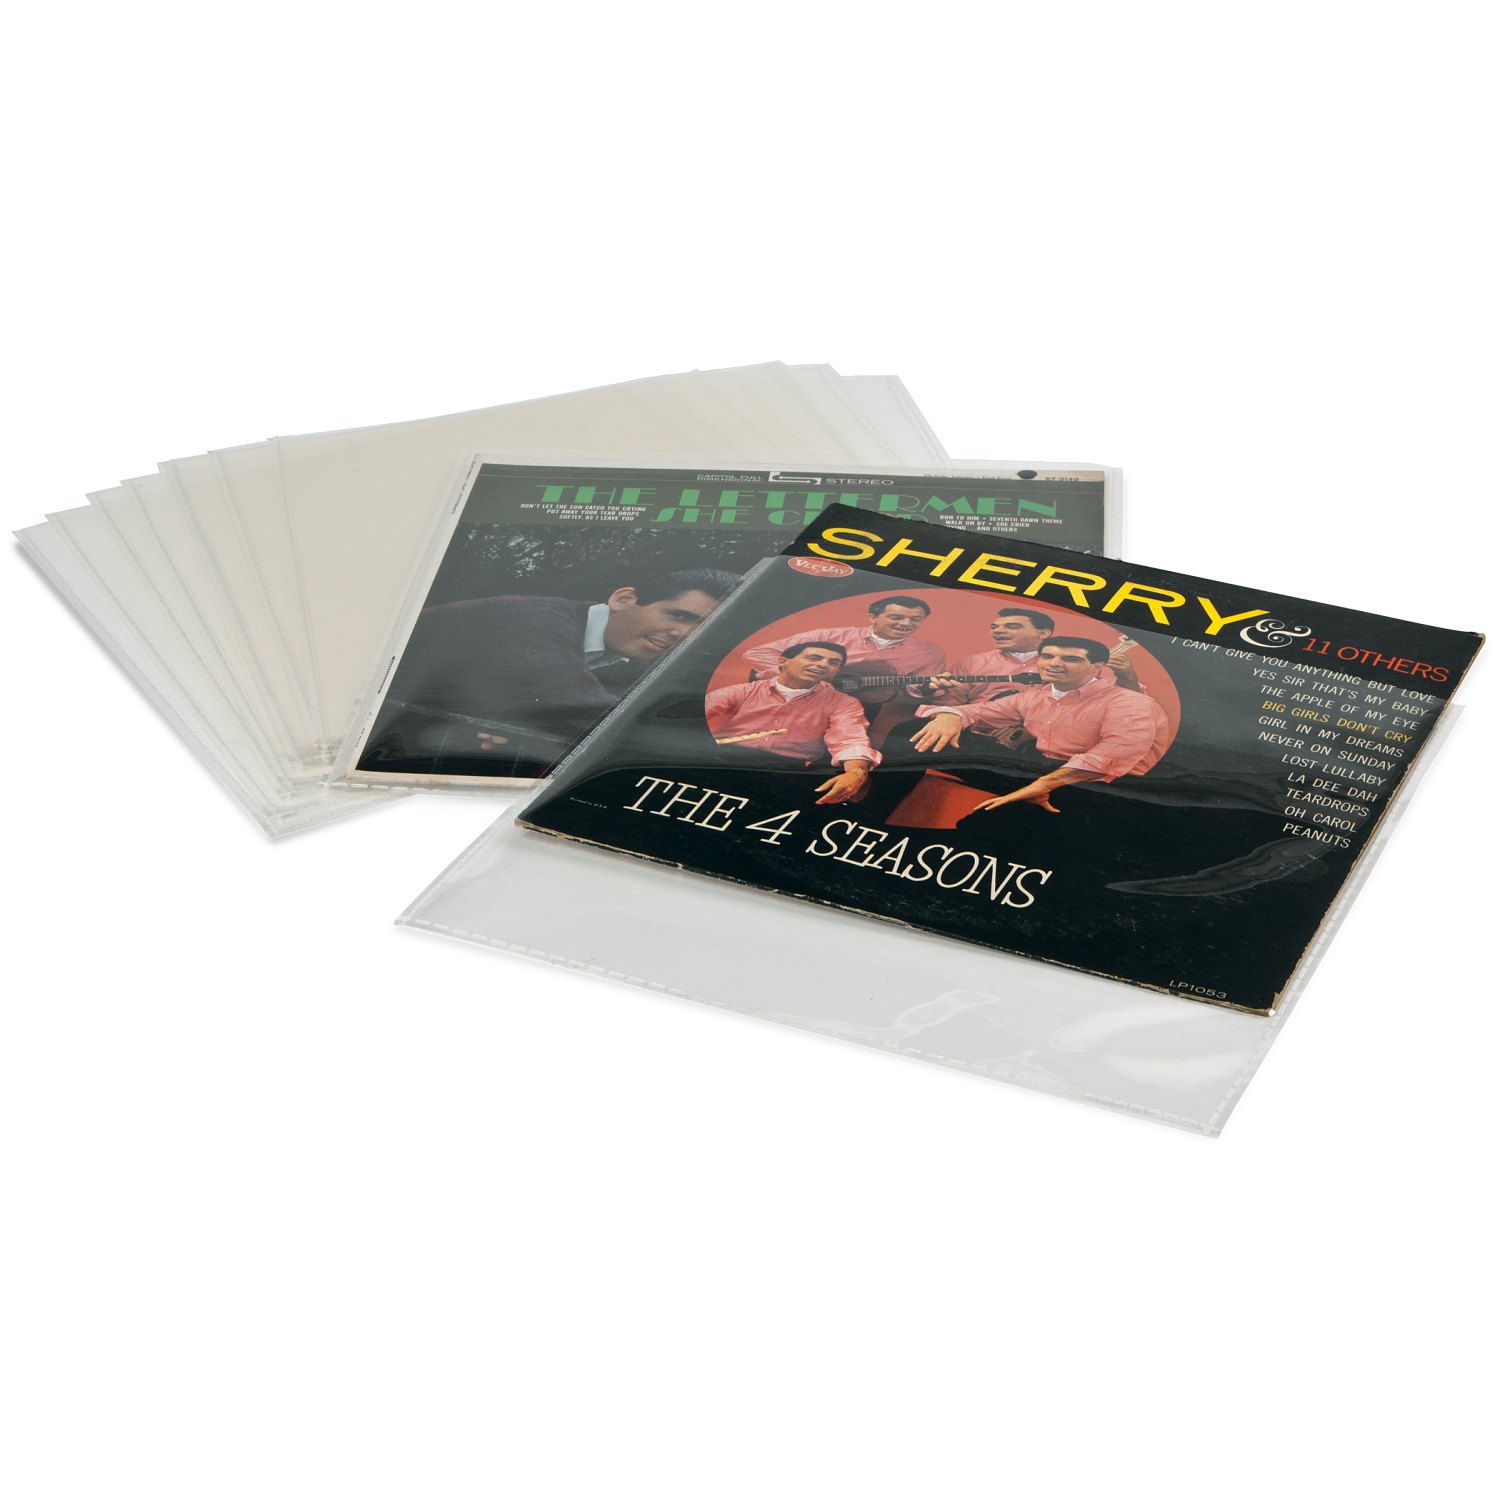 Gaylord Archival® 4 mil Archival Polyester LP Record Sleeves (10-Pack), Archival Envelopes, Sleeves & Protectors, Preservation